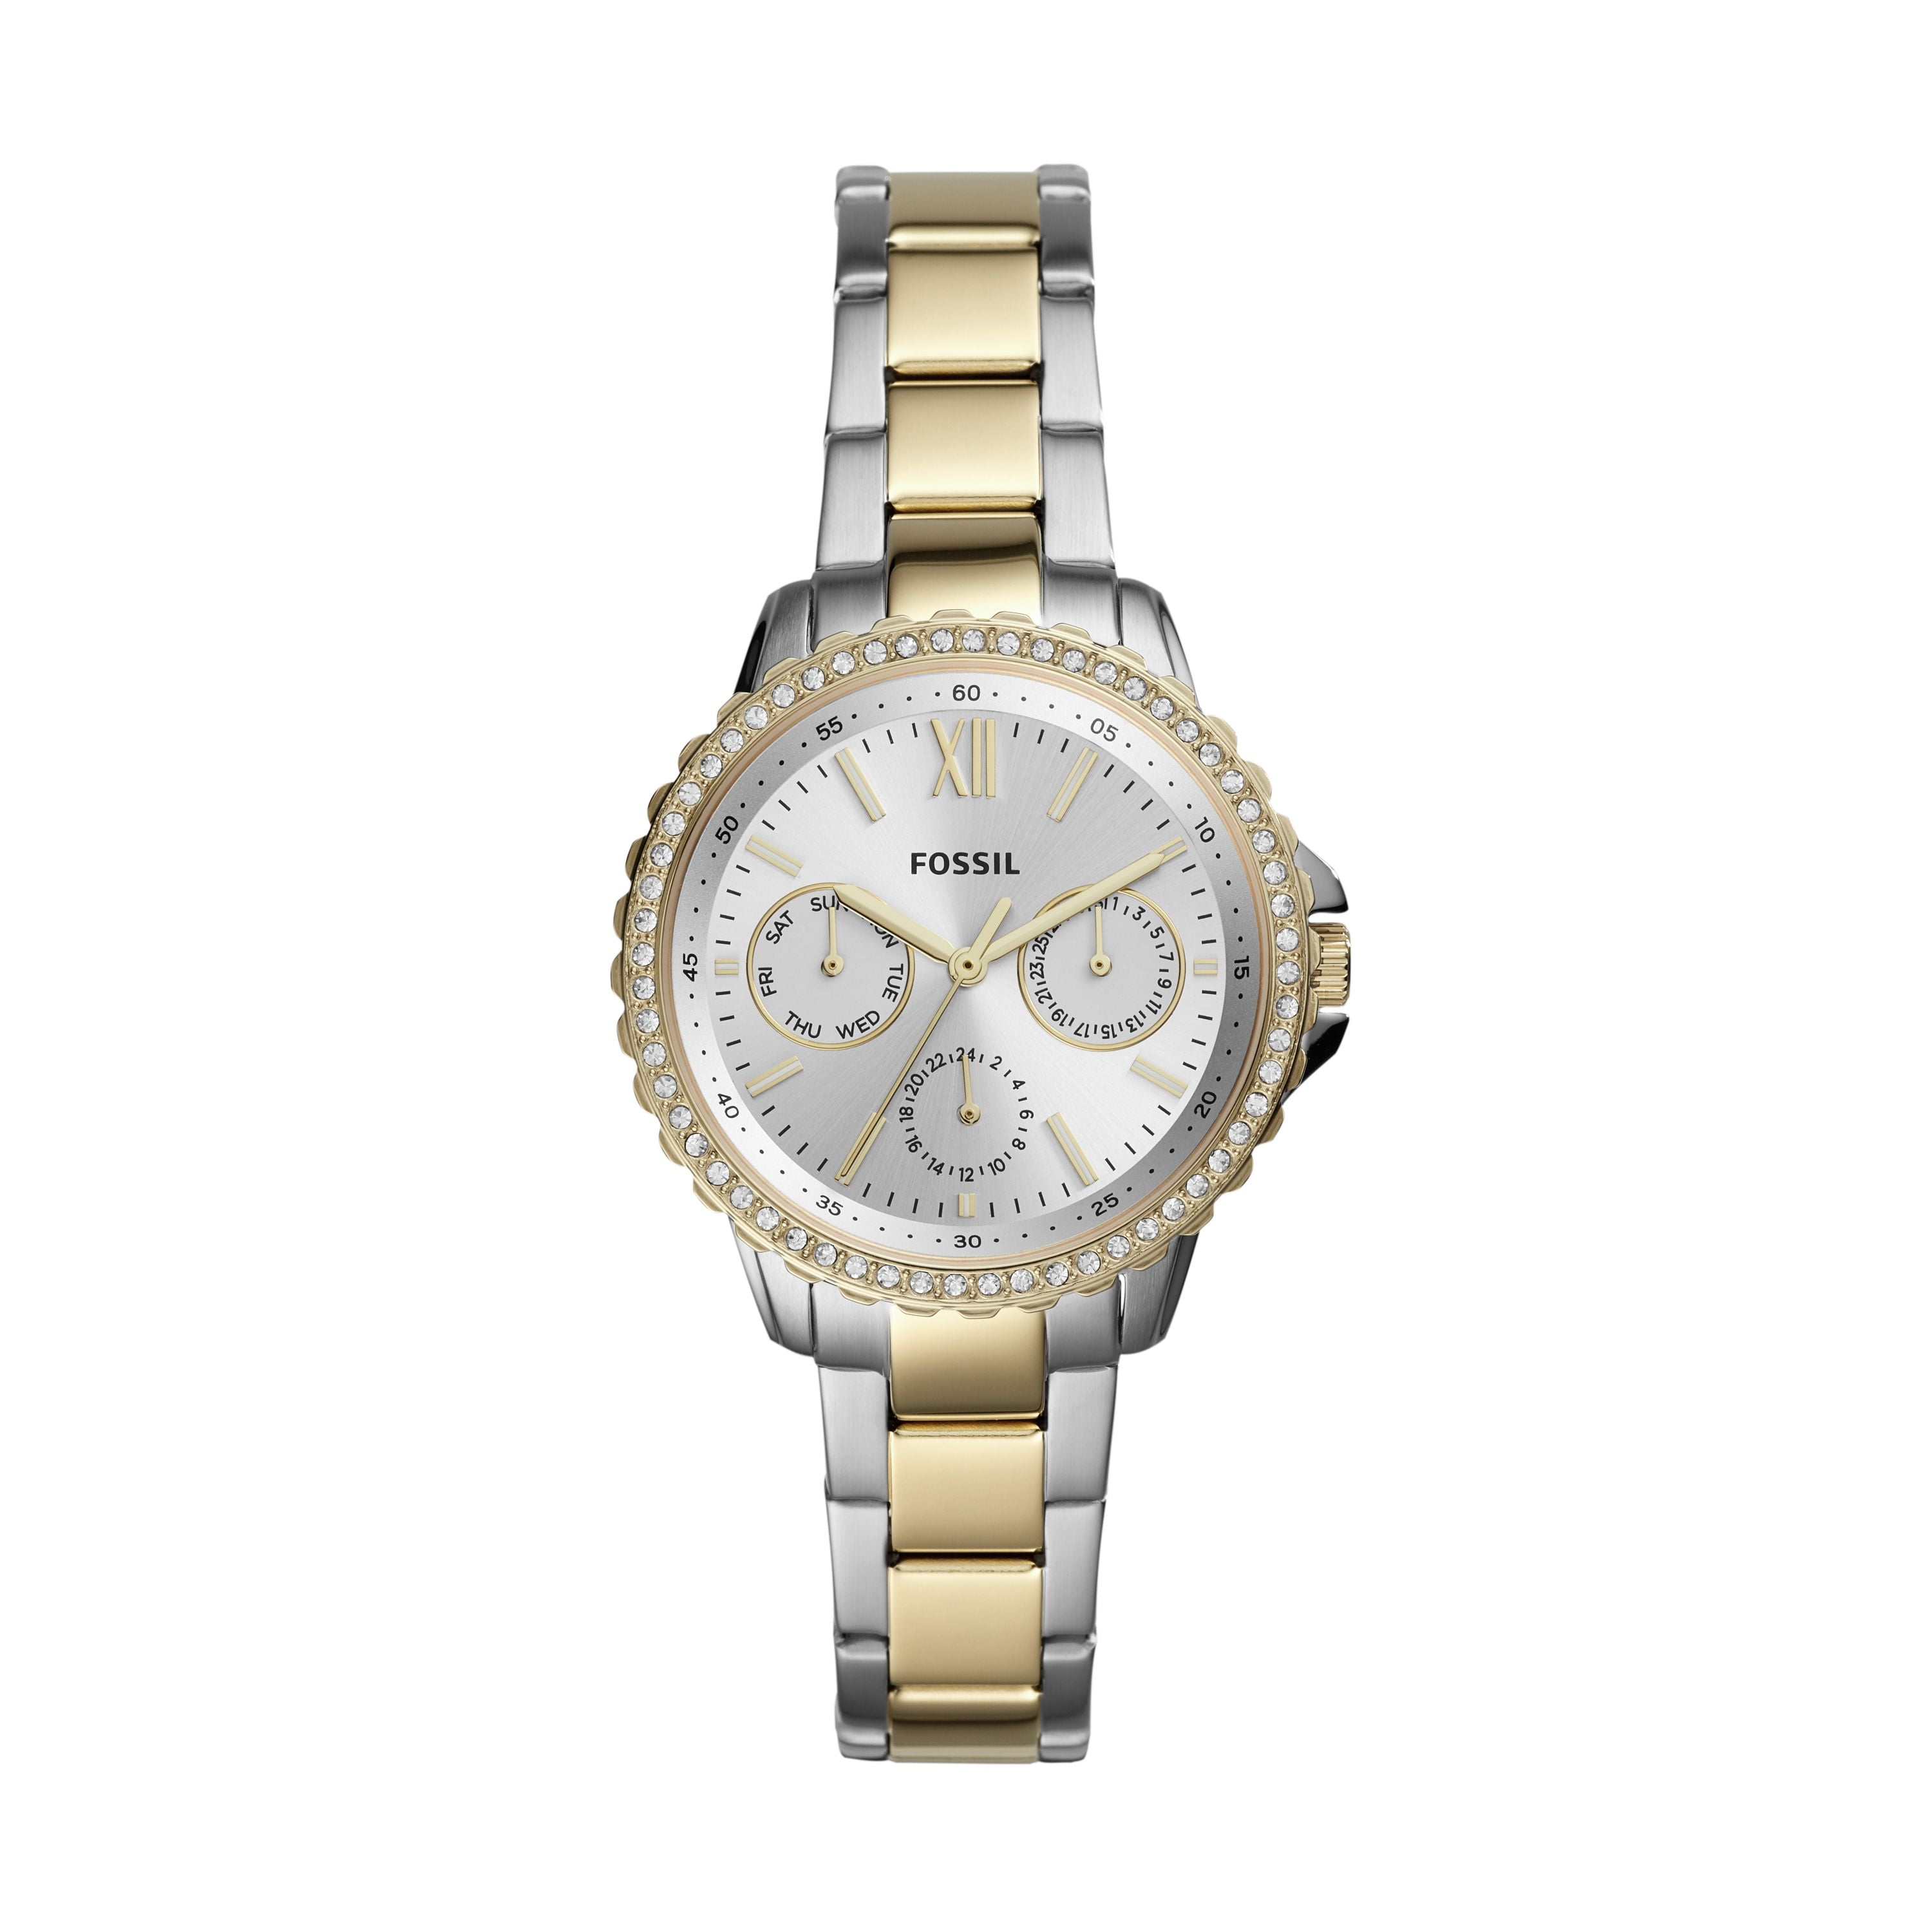 Fossil Women's Izzy Multifunction, Stainless Steel Watch, ES4784